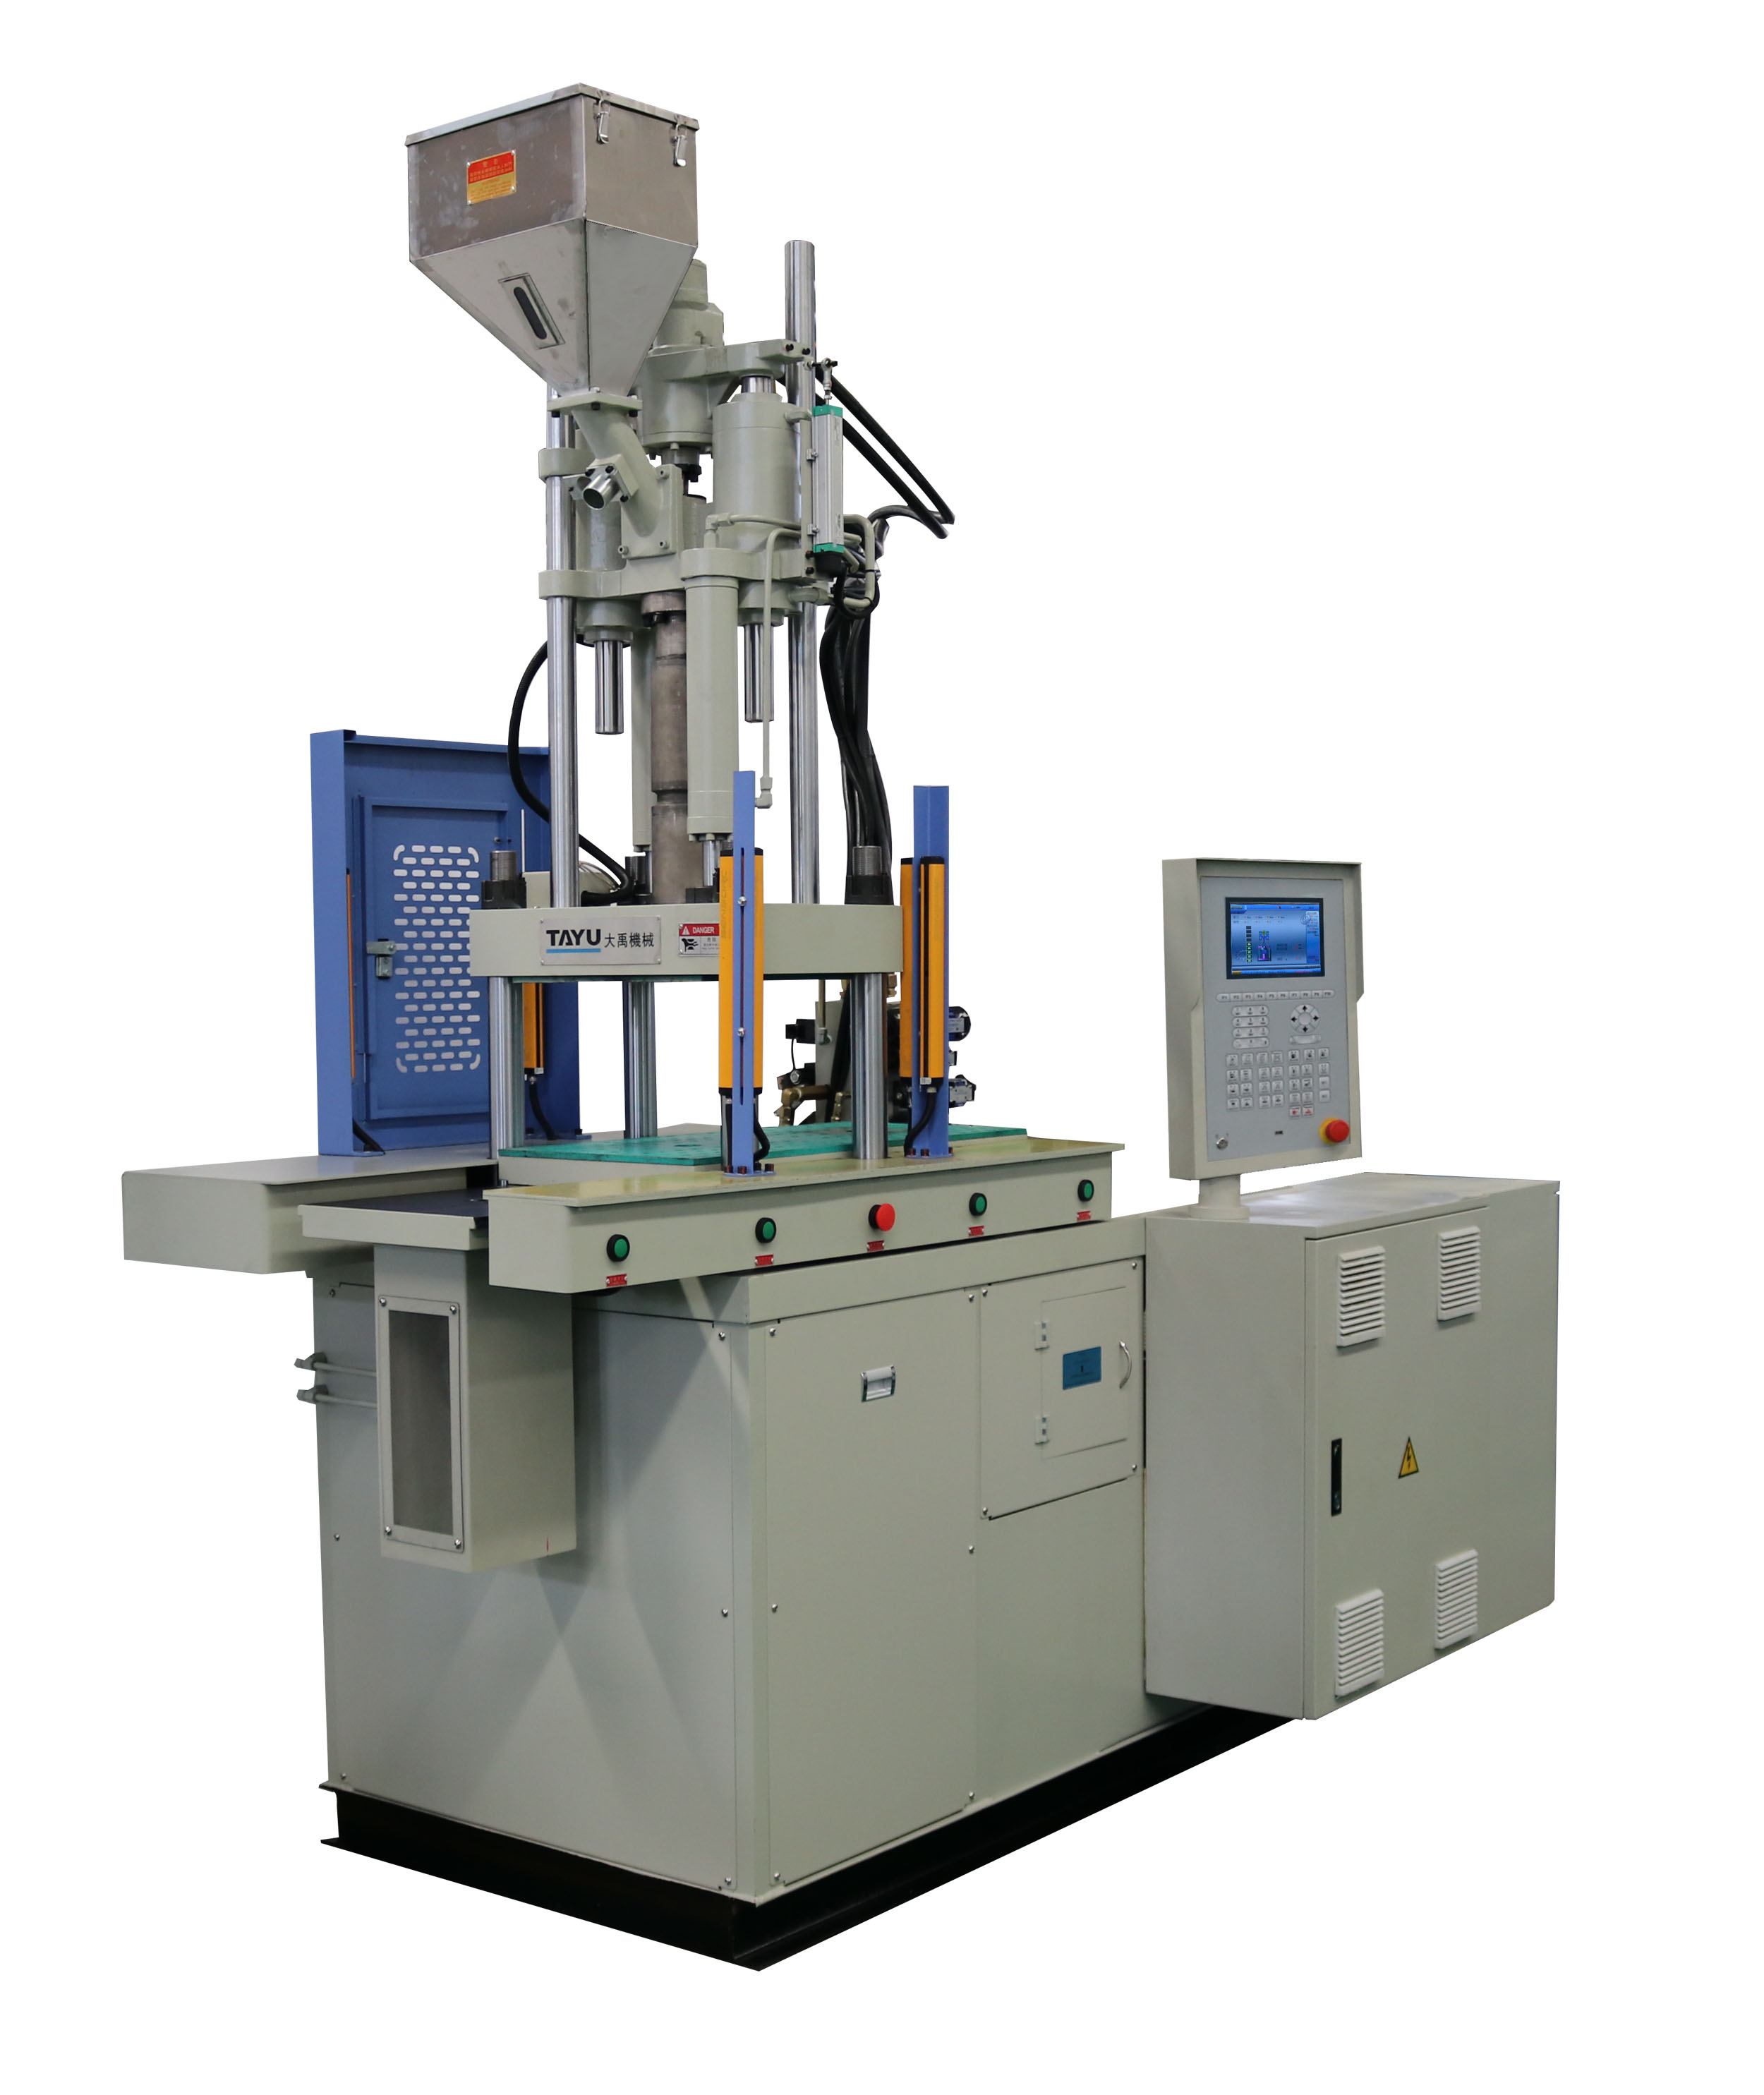 TY-600DS.B vertical injection molding machine